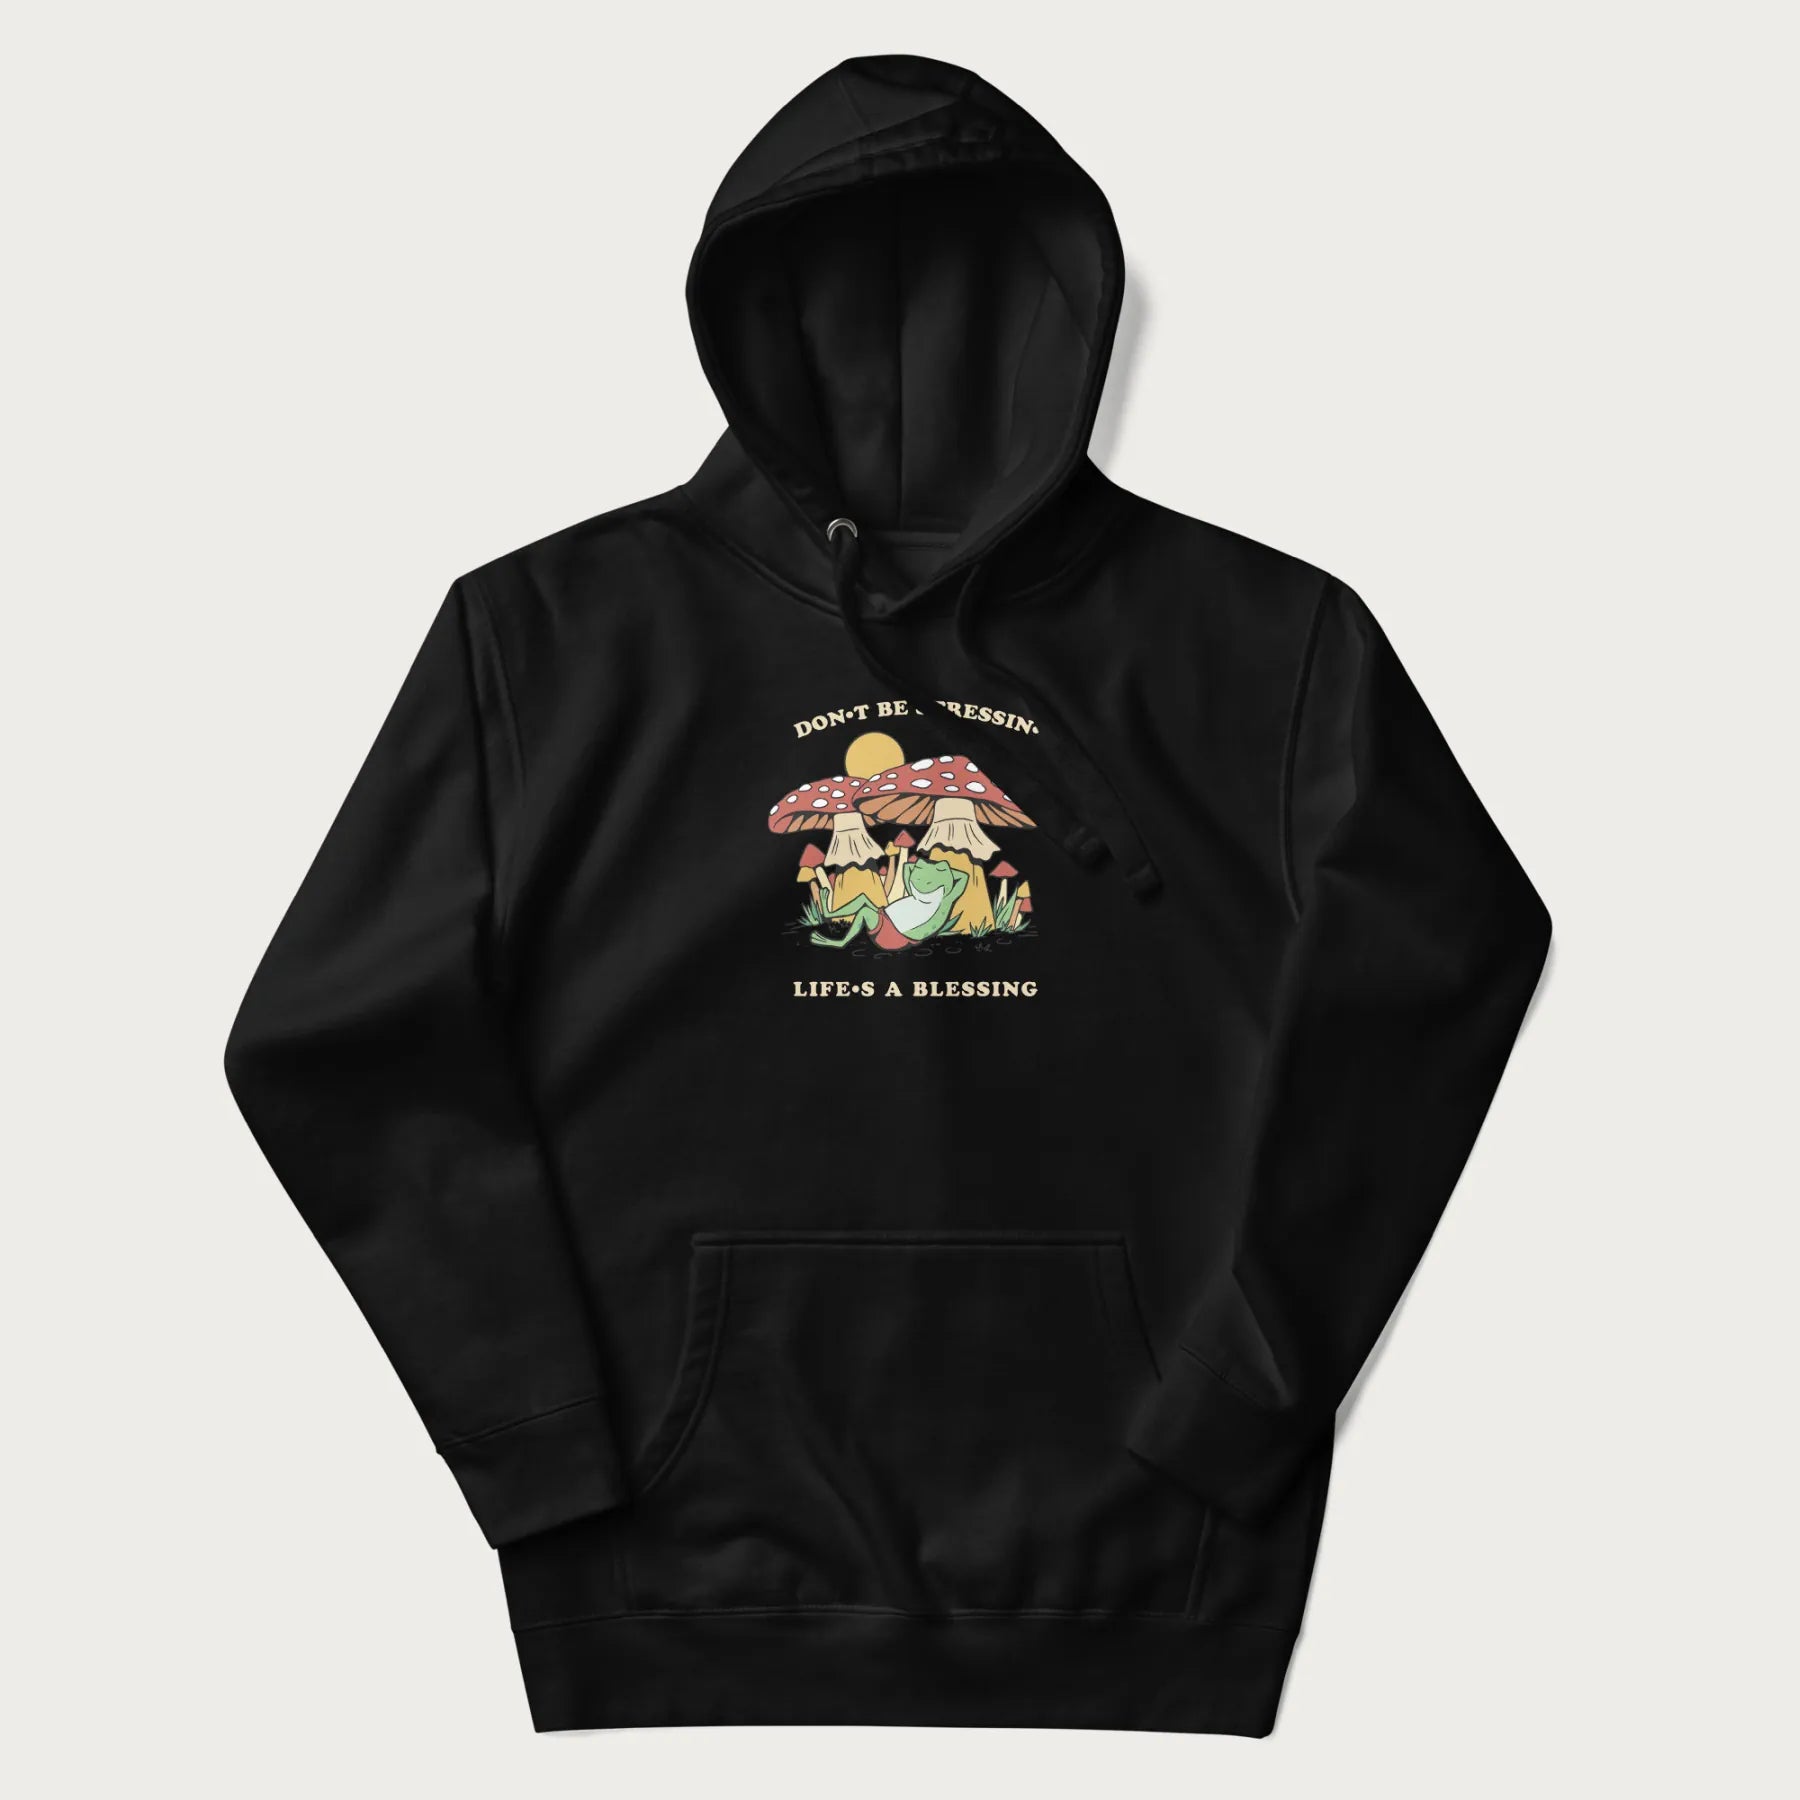 Black hoodie with a graphic of a frog lounging under mushrooms and the phrases 'Don't Be Stressin' Life's a Blessing'.